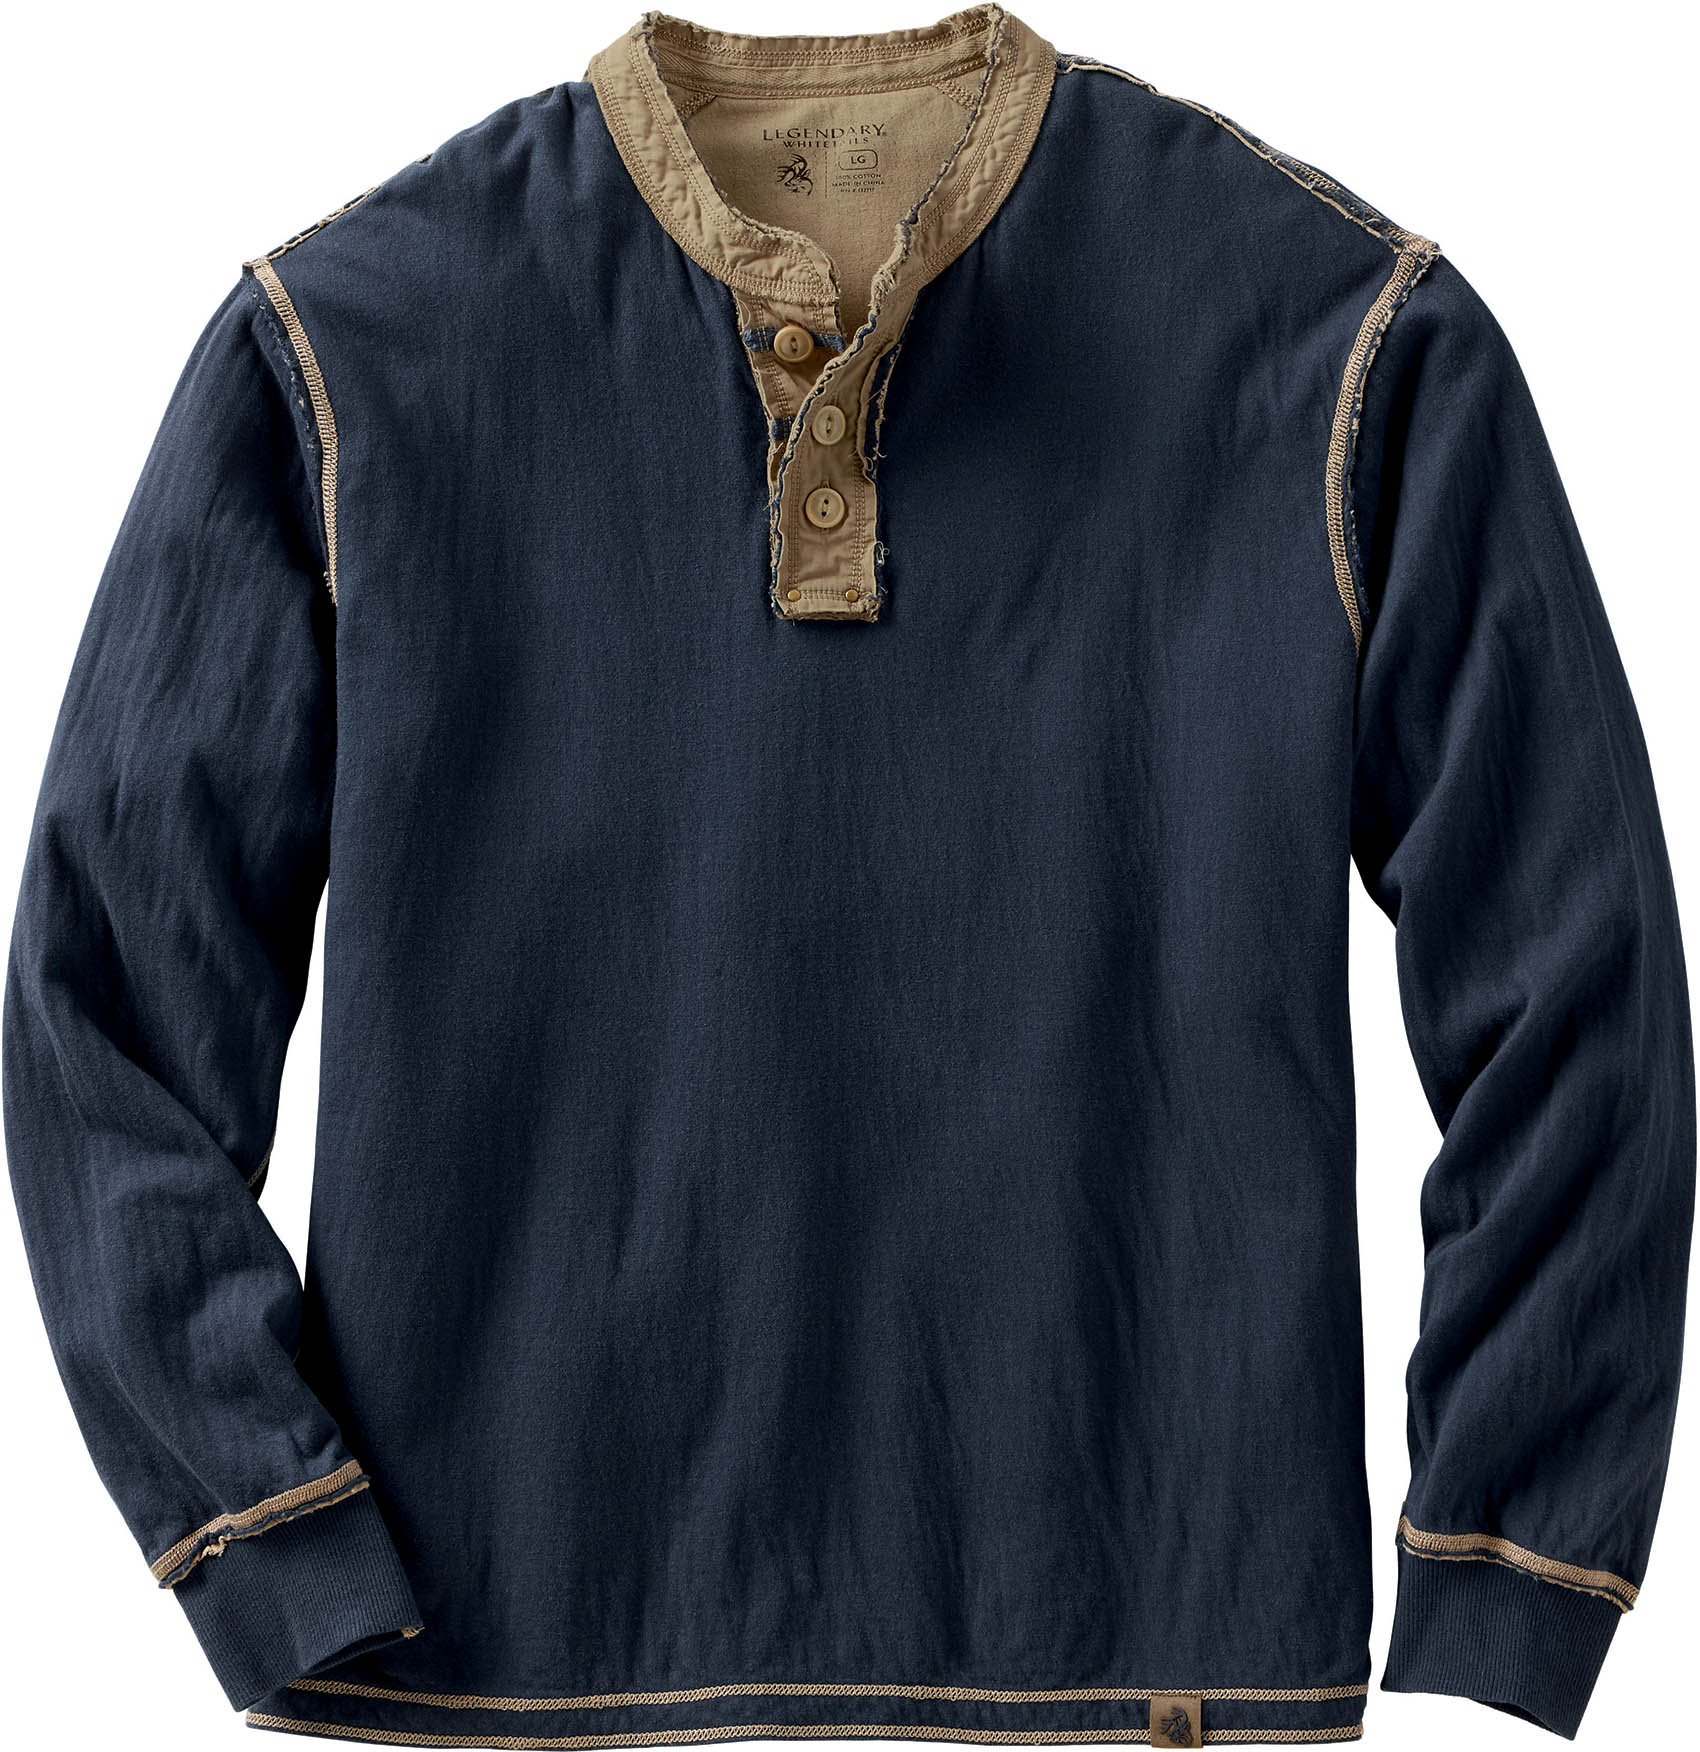 Shop Men's Fully Charged Henley | Legendary Whitetails